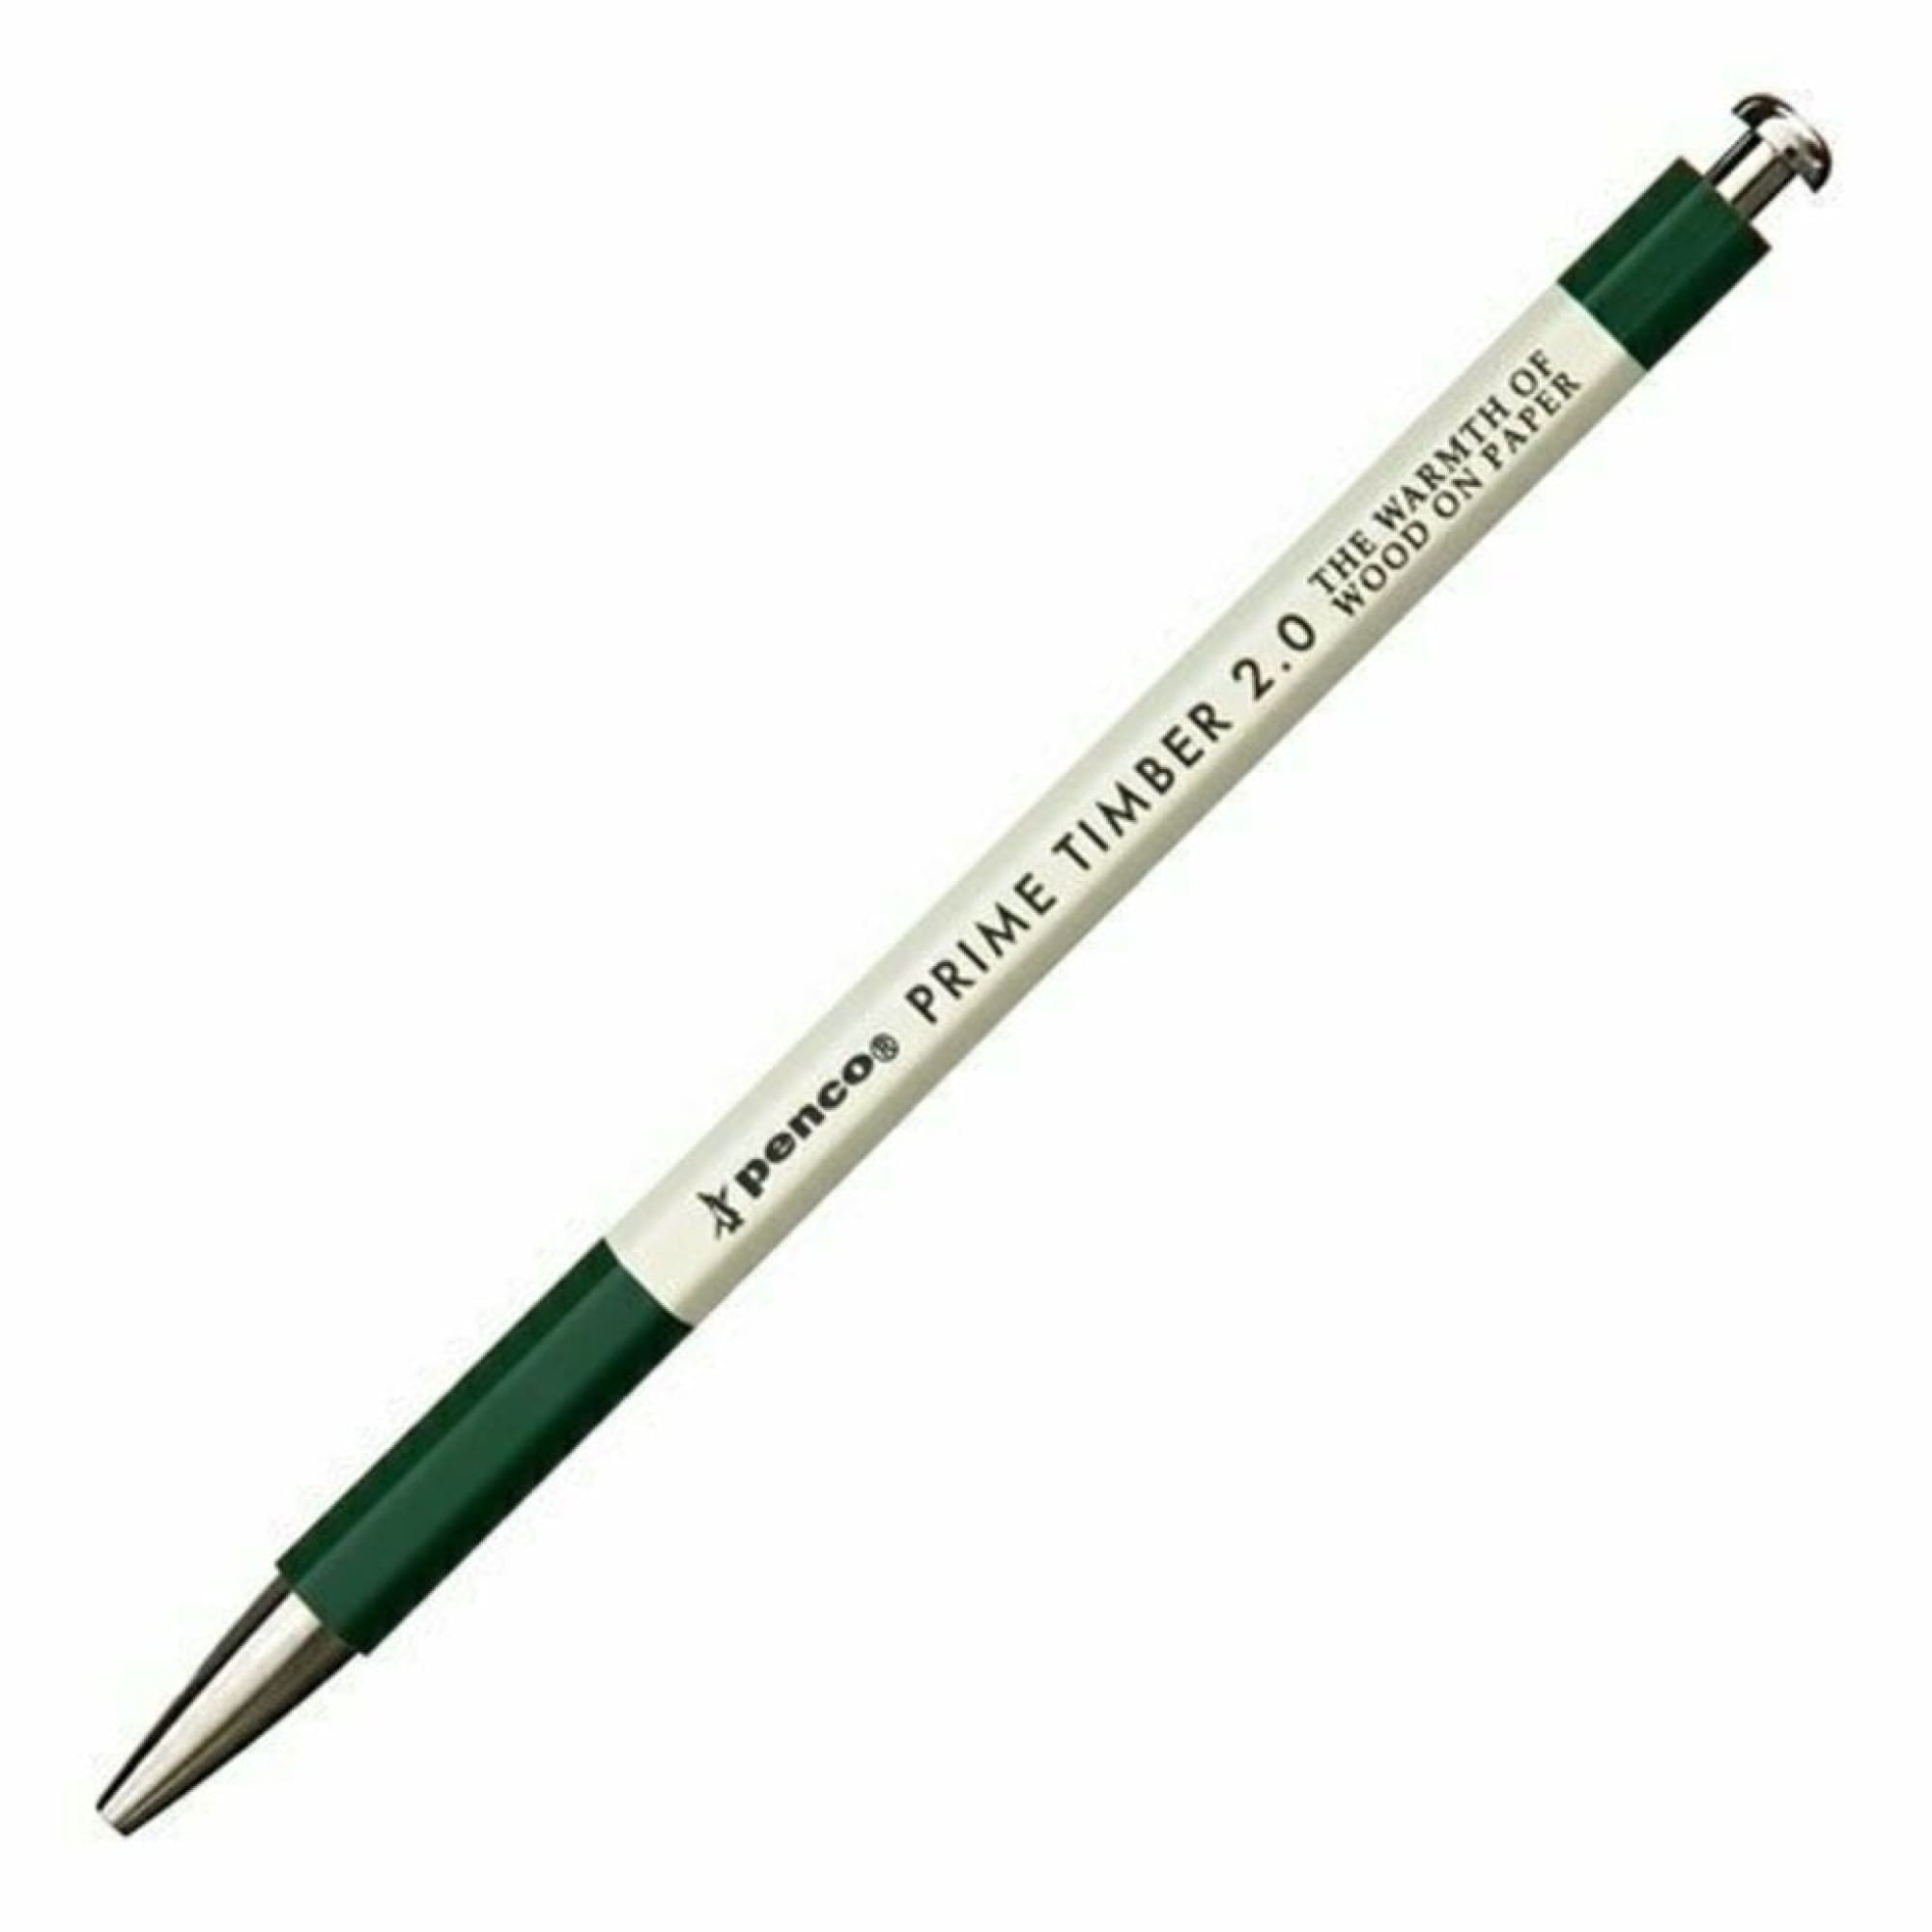 Penco Prime Timber Mechanical Pencil - 2.0 mm | White and Green | Penco